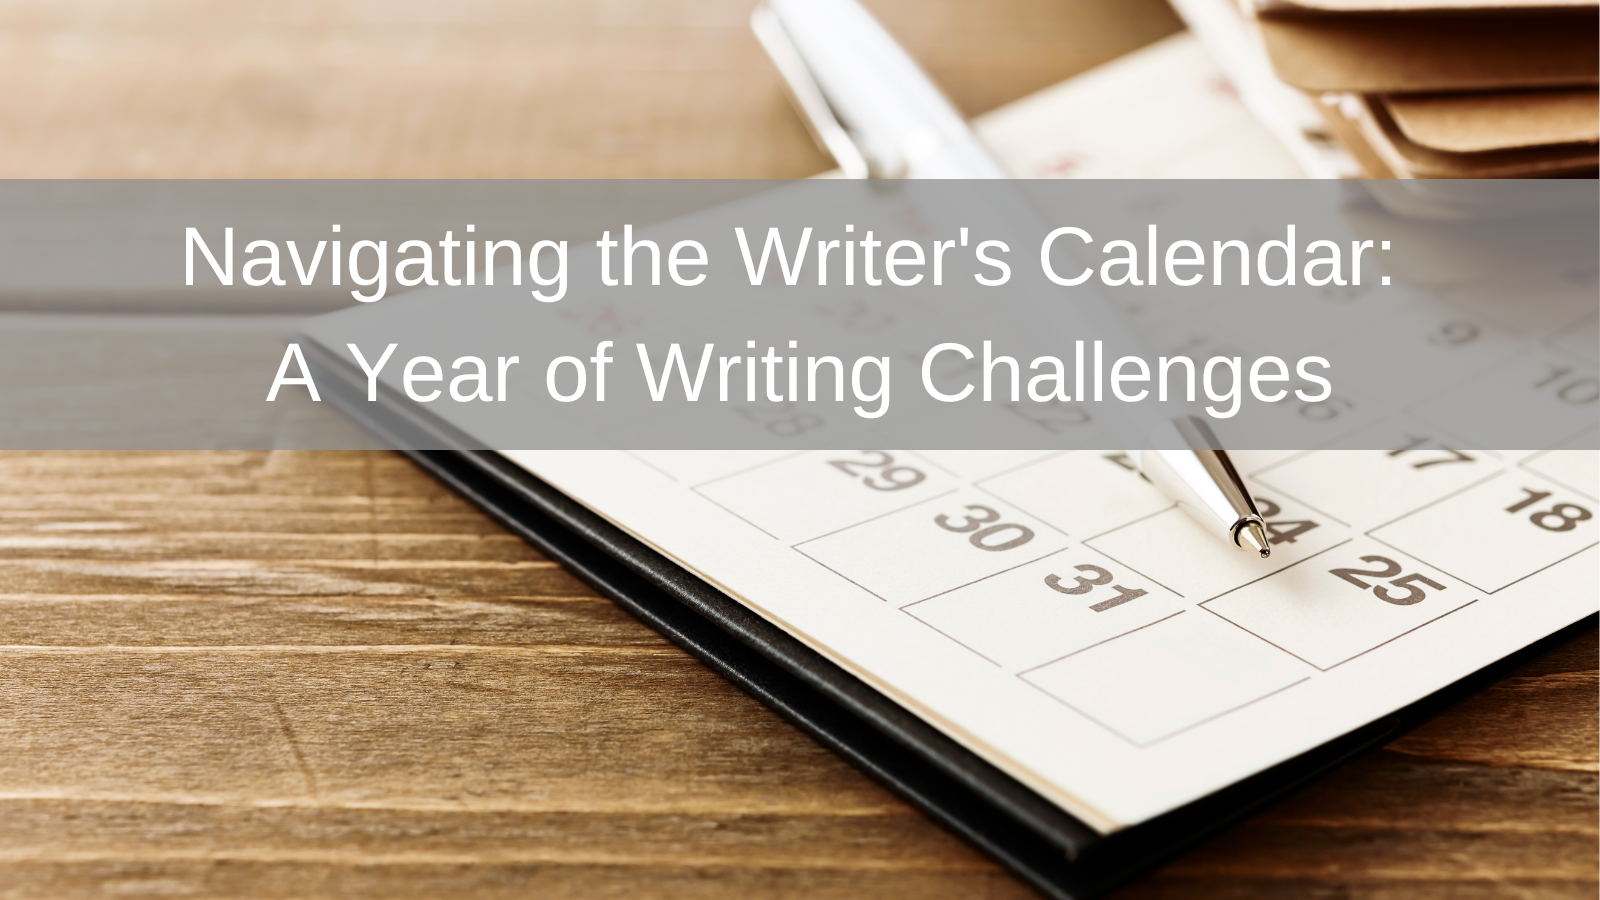 Navigating the Writer's Calendar: A Year of Writing Challenges